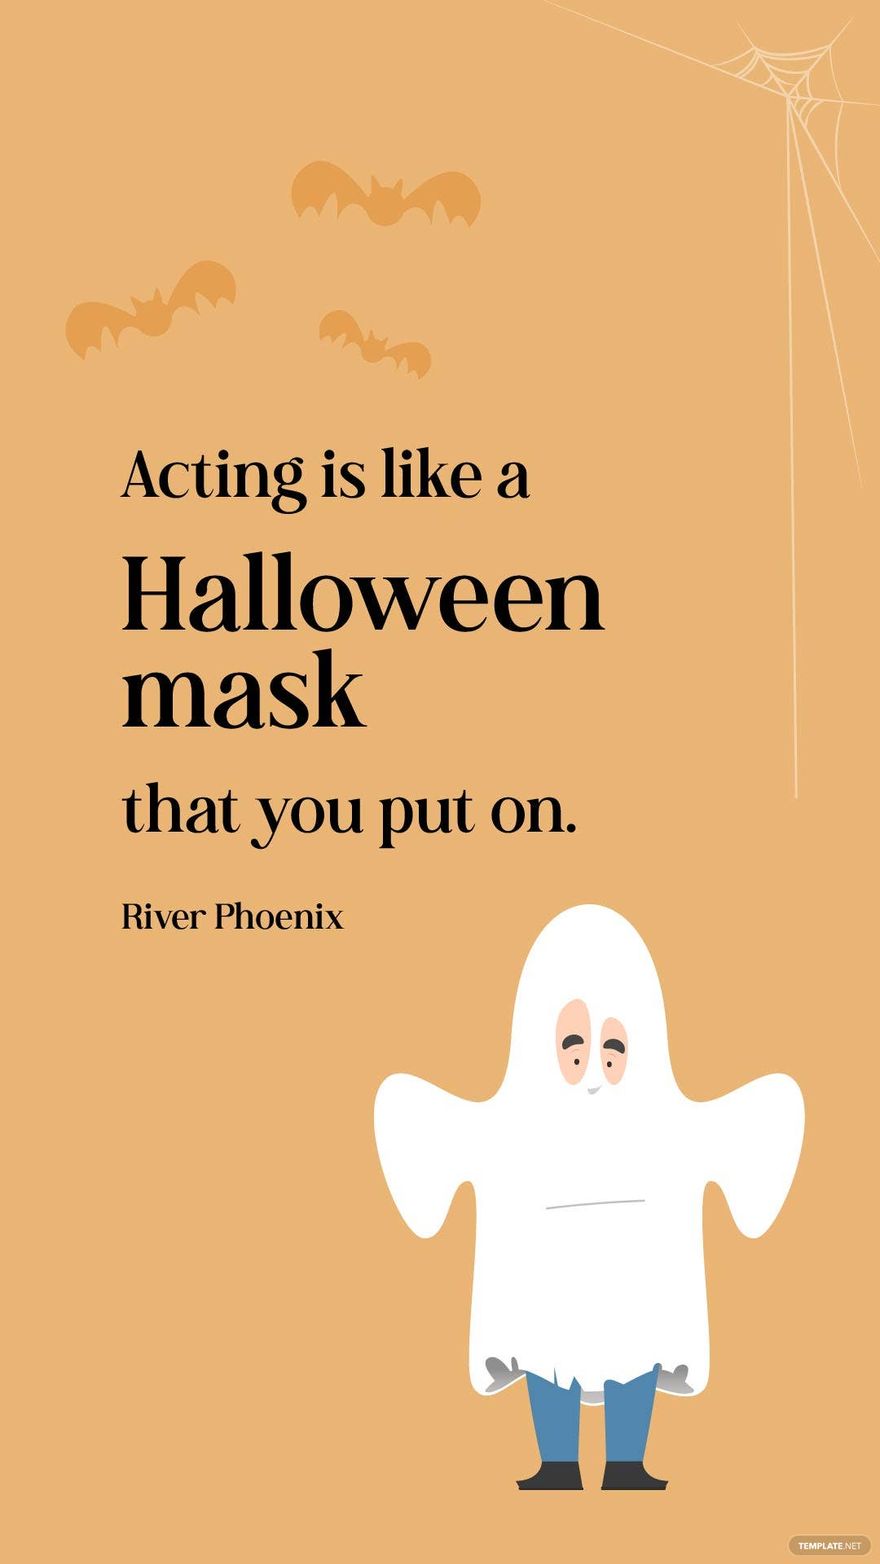 River Phoenix-Acting is like a Halloween mask that you put on.